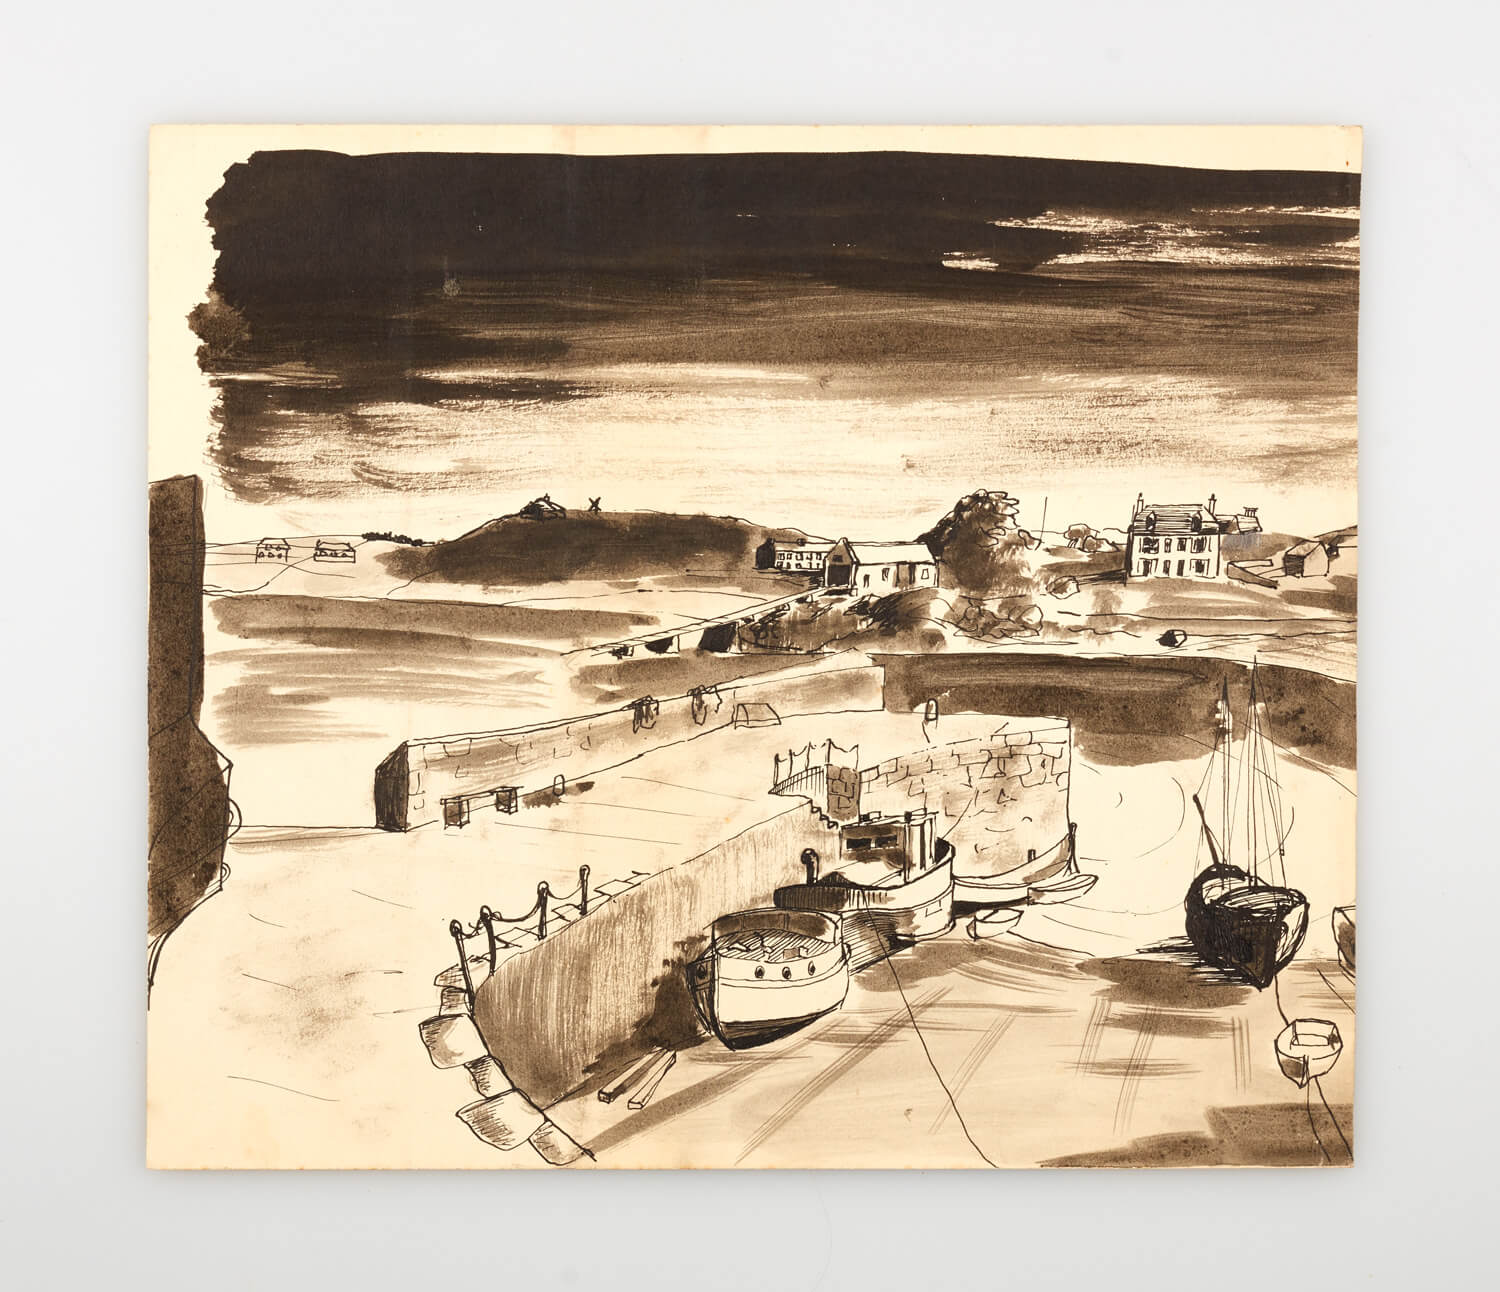 JB247 - Cornish Harbour - 1946 - 25 x 29 cm - Pen and ink and wash